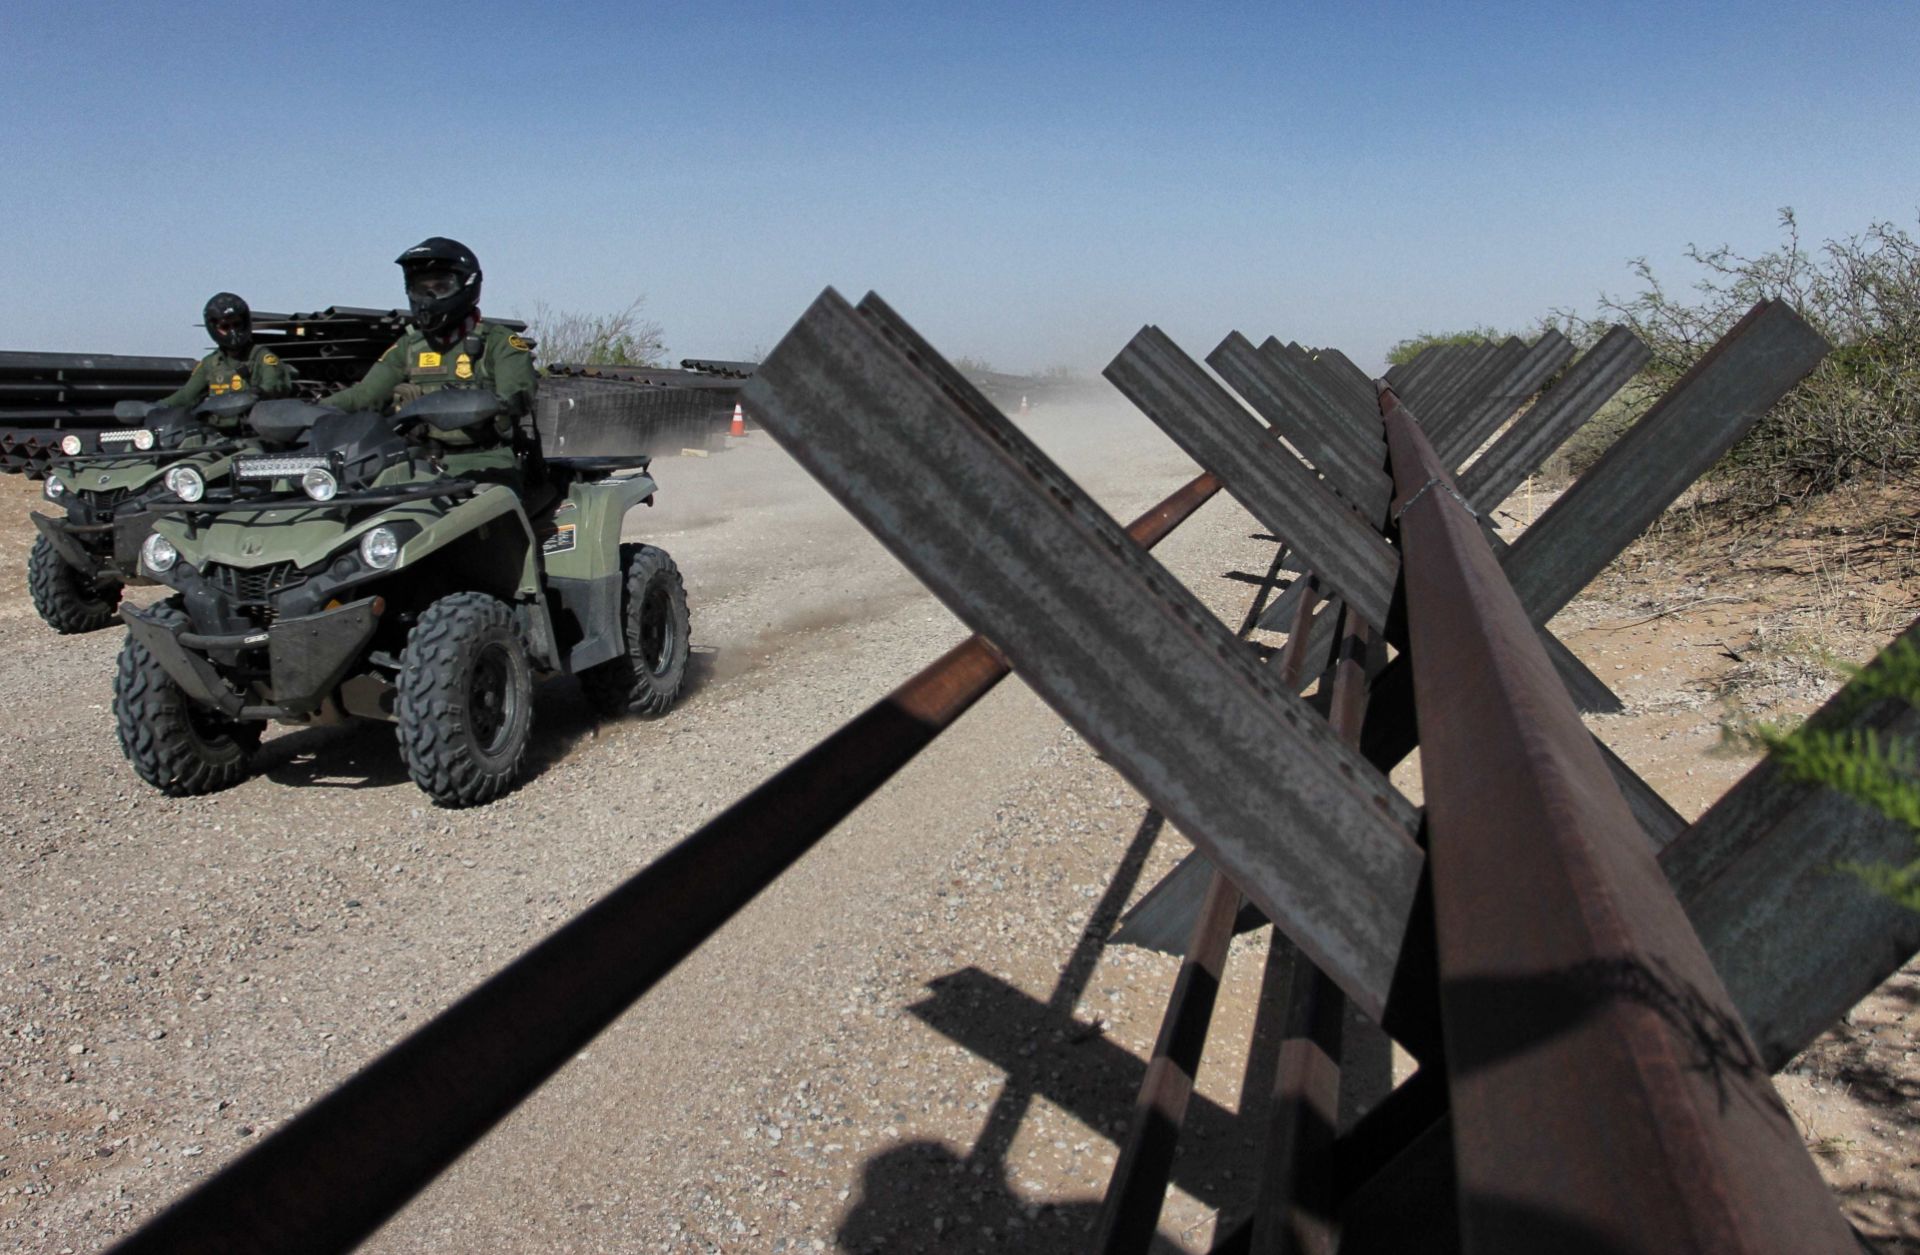 U.S. Border Patrol agents ride ATVs alongside an unfinished portion of a border wall between Ciudad Juarez in Mexico and Santa Teresa in the United States on April 17, 2018.